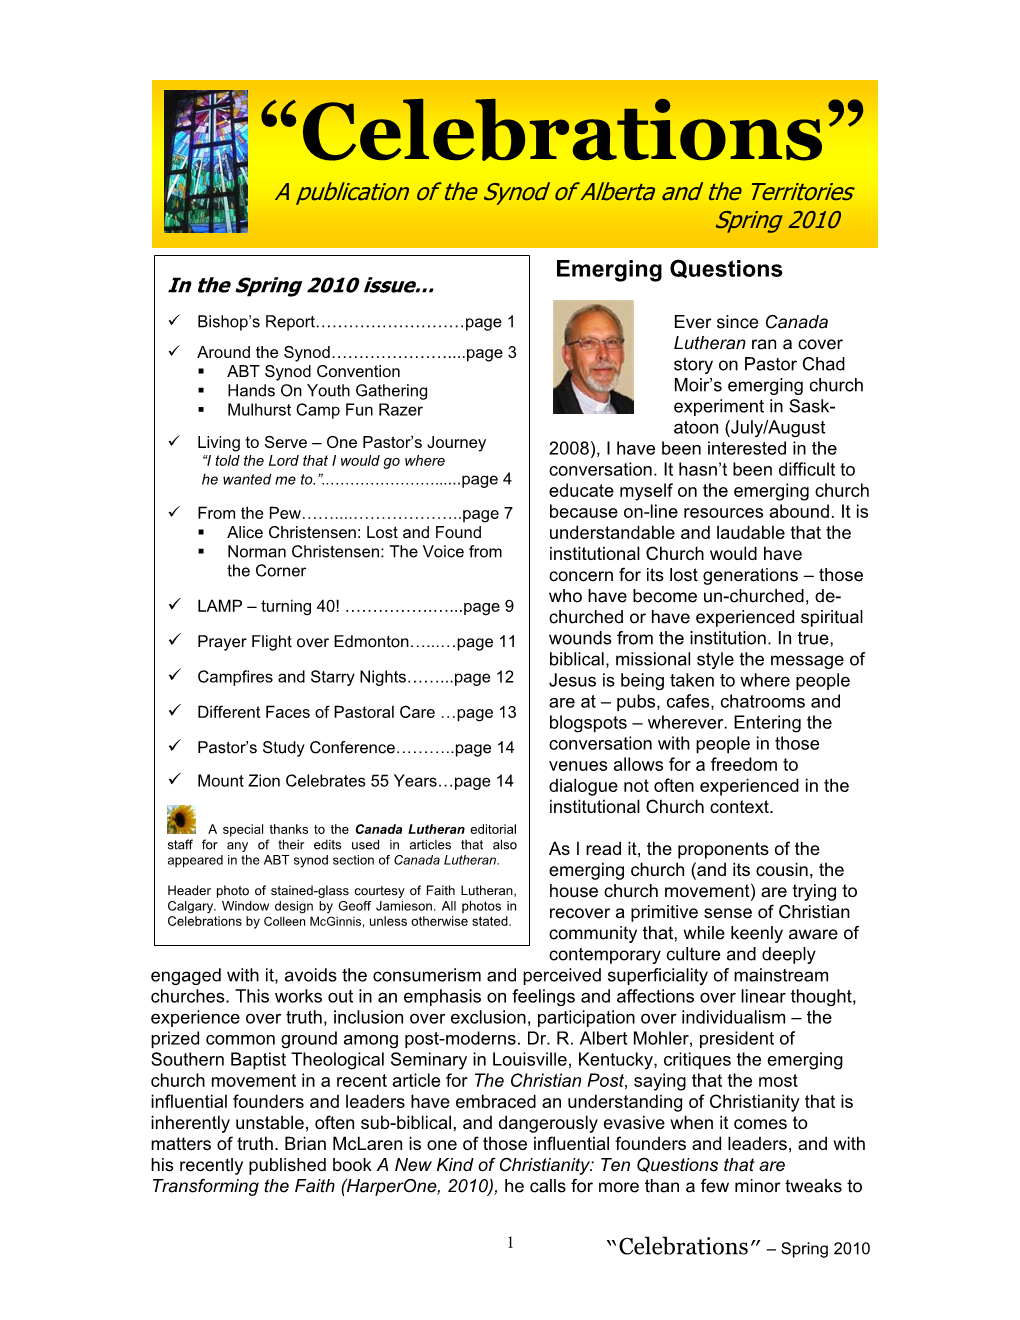 “Celebrations” a Publication of the Synod of Alberta and the Territories Spring 2010